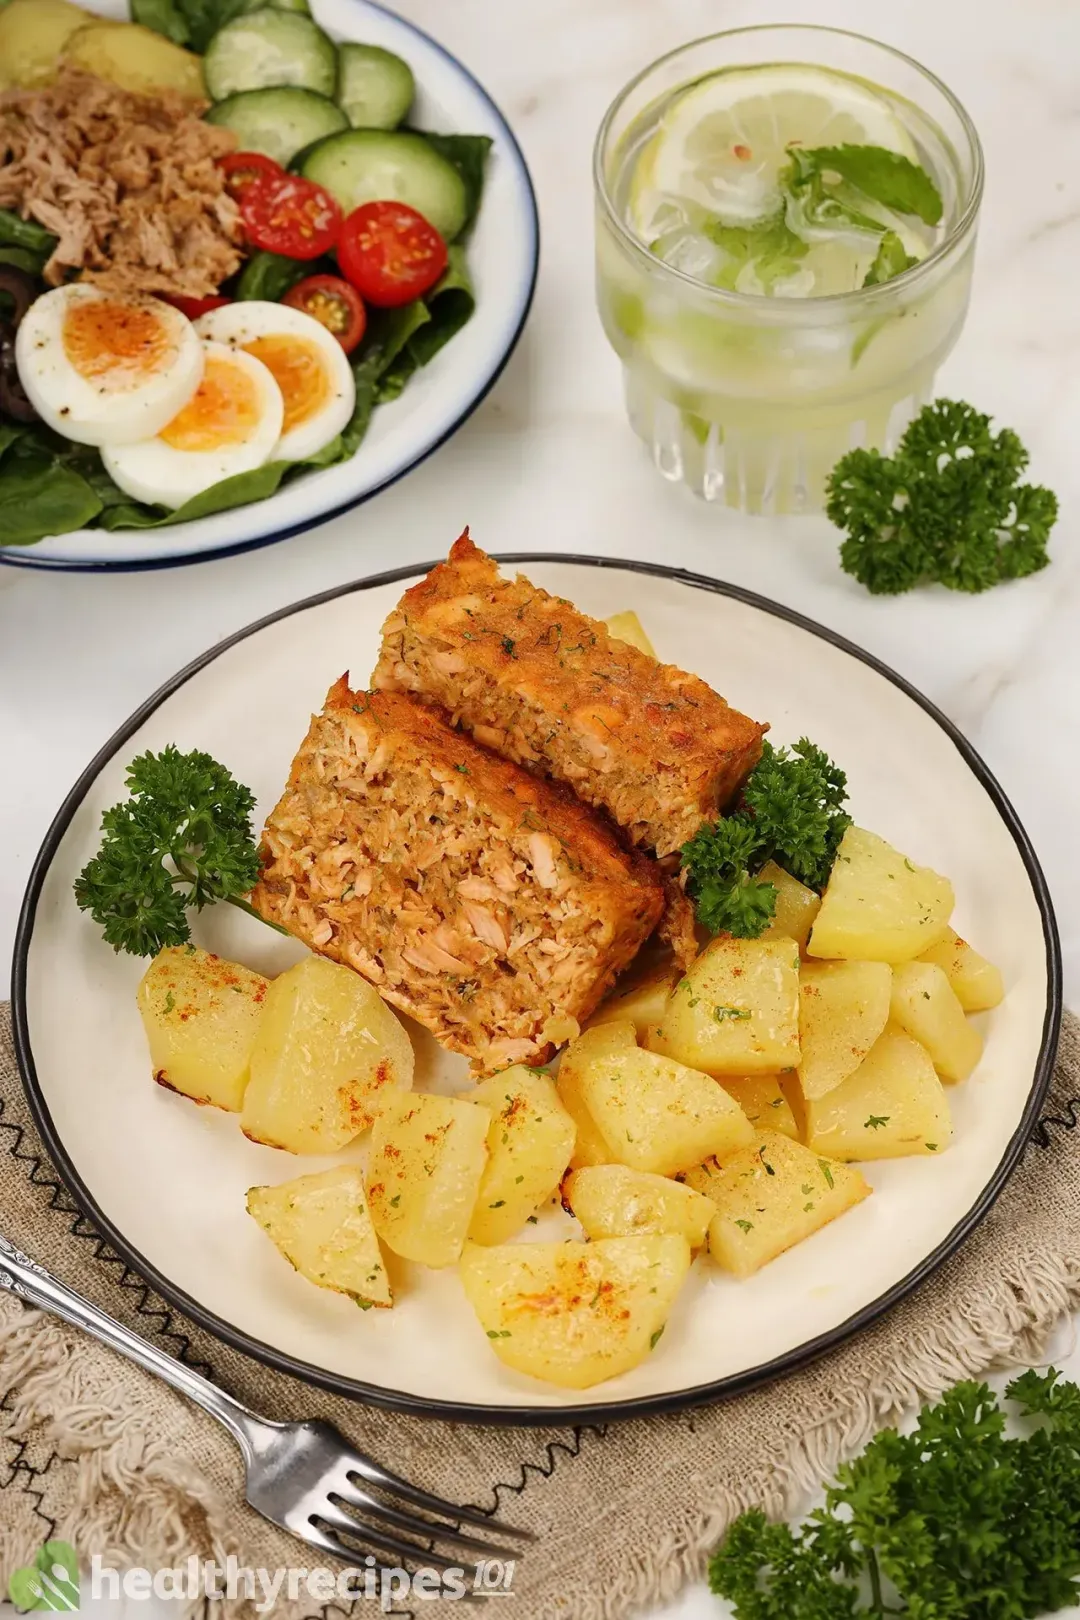 A plate containing salmon cakes and potato cubes decorated with fresh parsley, laid near a plate of salad and a glass of lime water